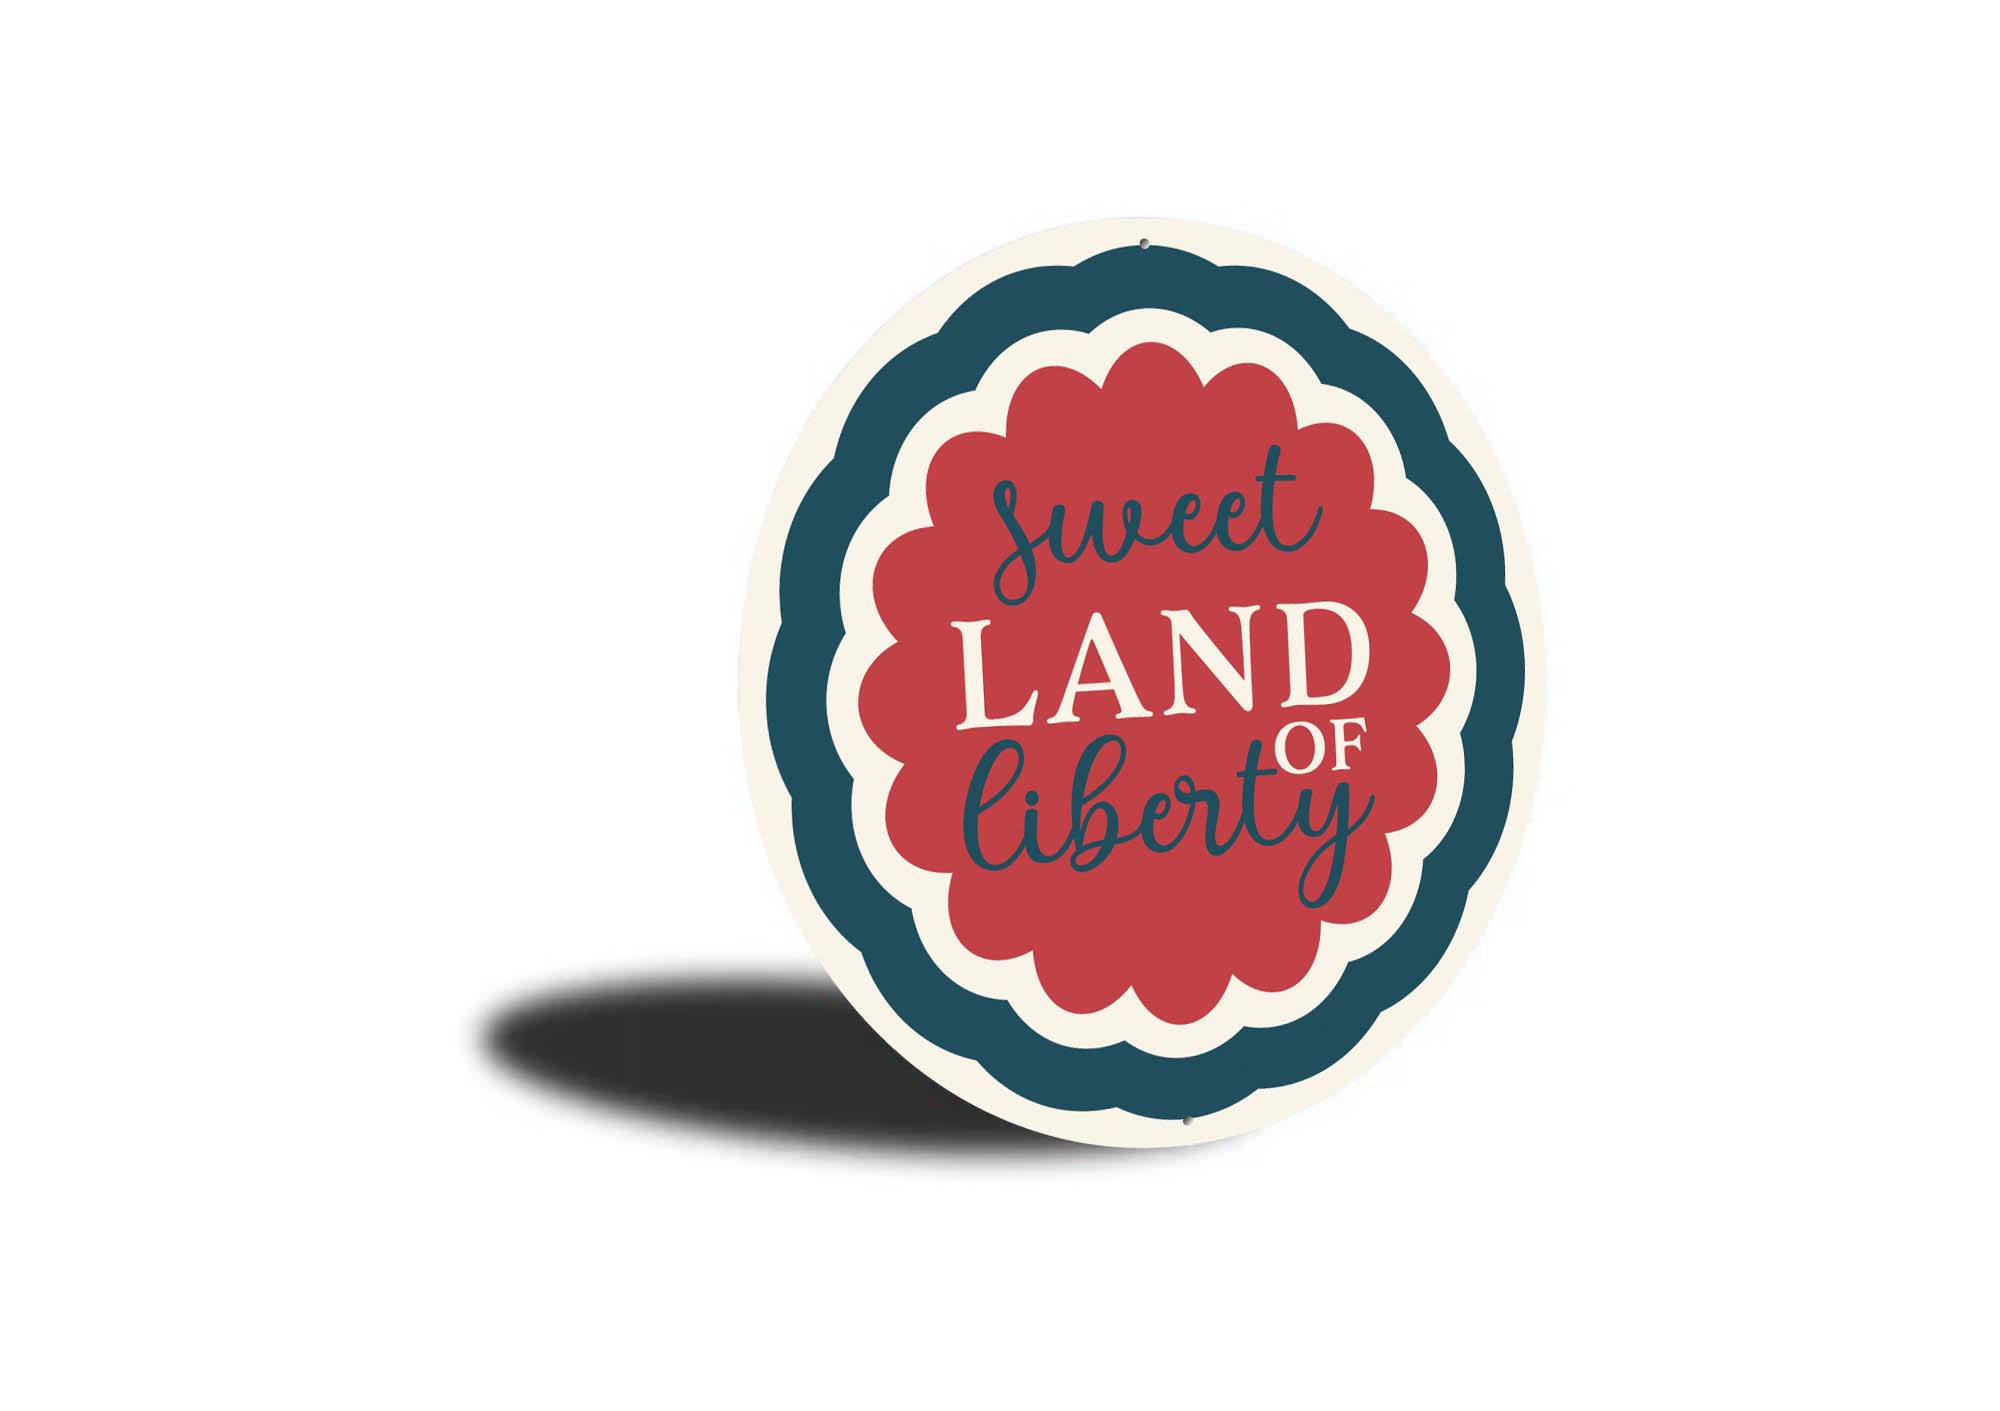 Sweet Land Of Liberty Round Sign